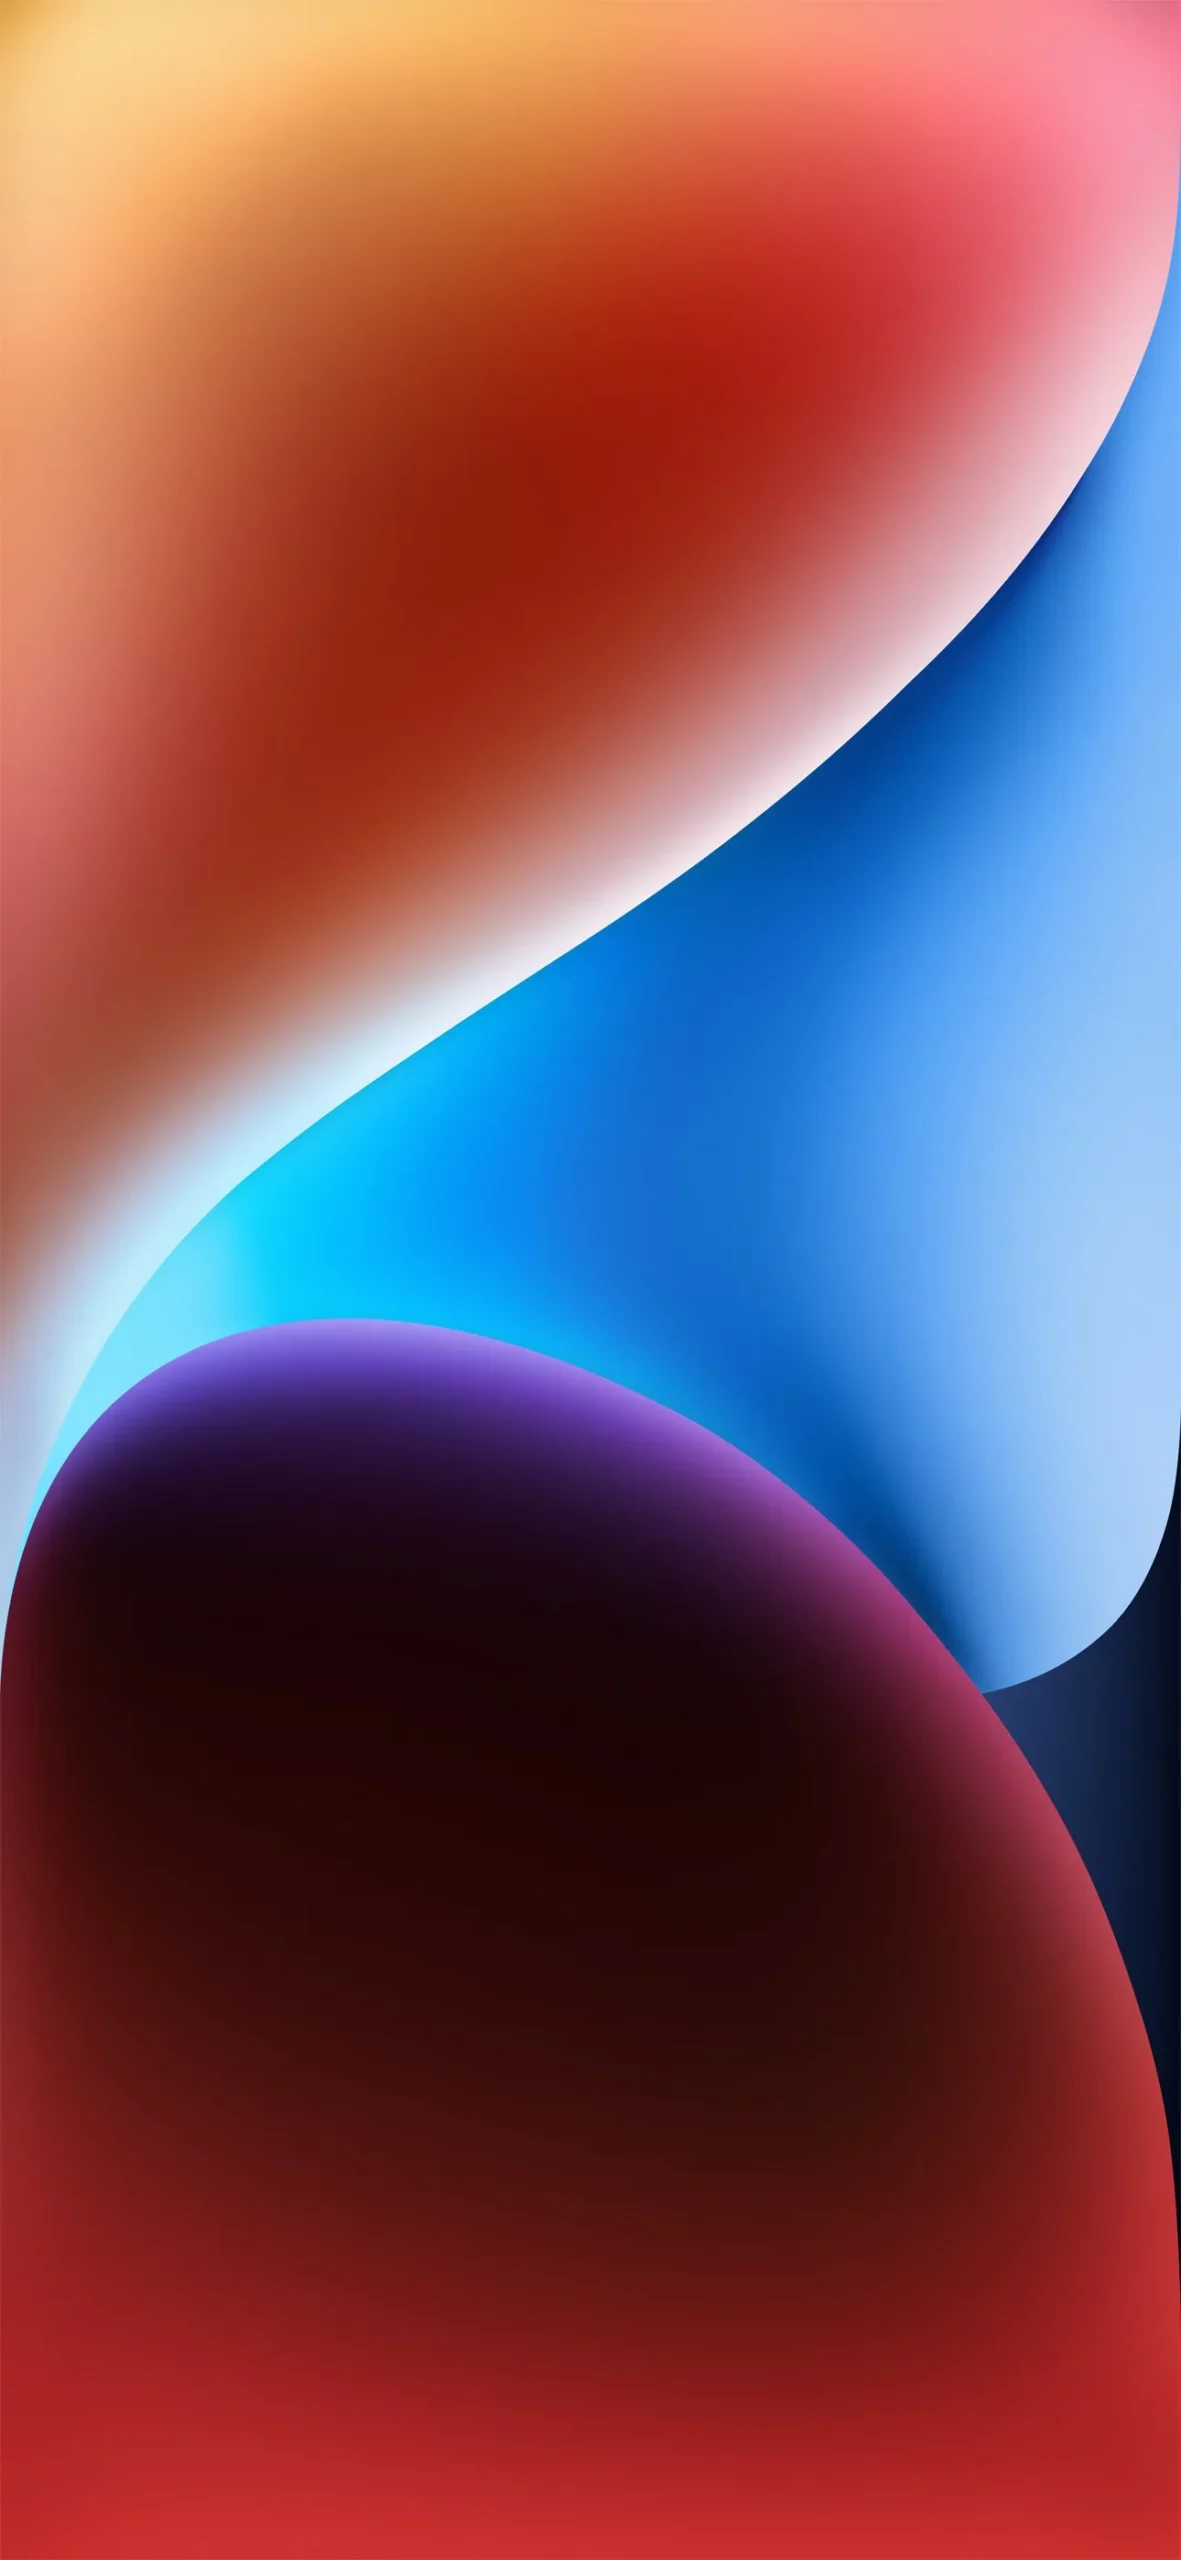 Download iPhone 14 and iPhone 14 Pro wallpapers in full resolution